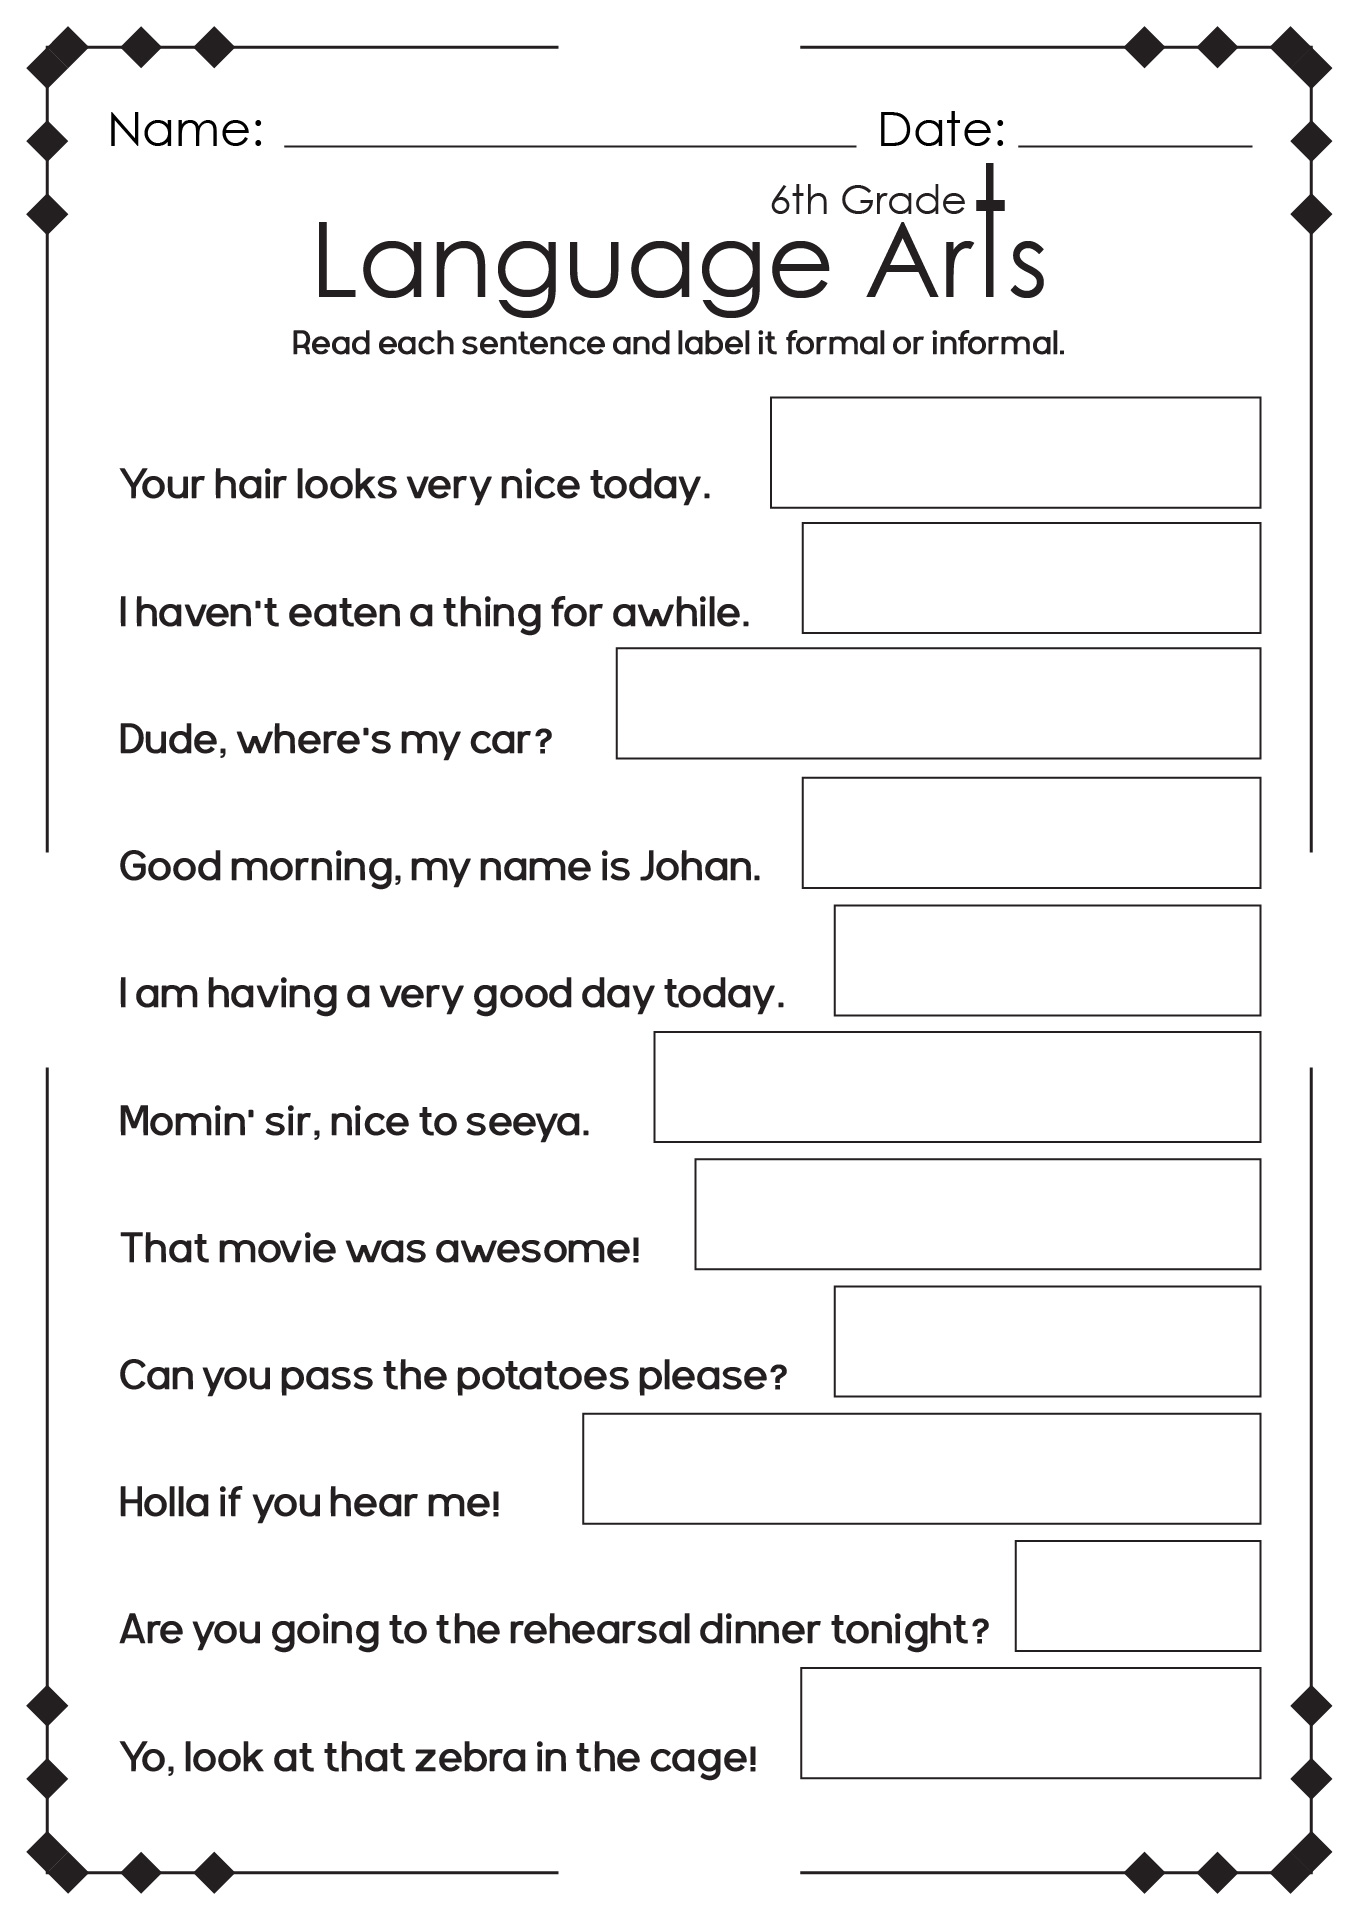 13-best-images-of-high-school-english-language-arts-worksheets-high-school-english-worksheets